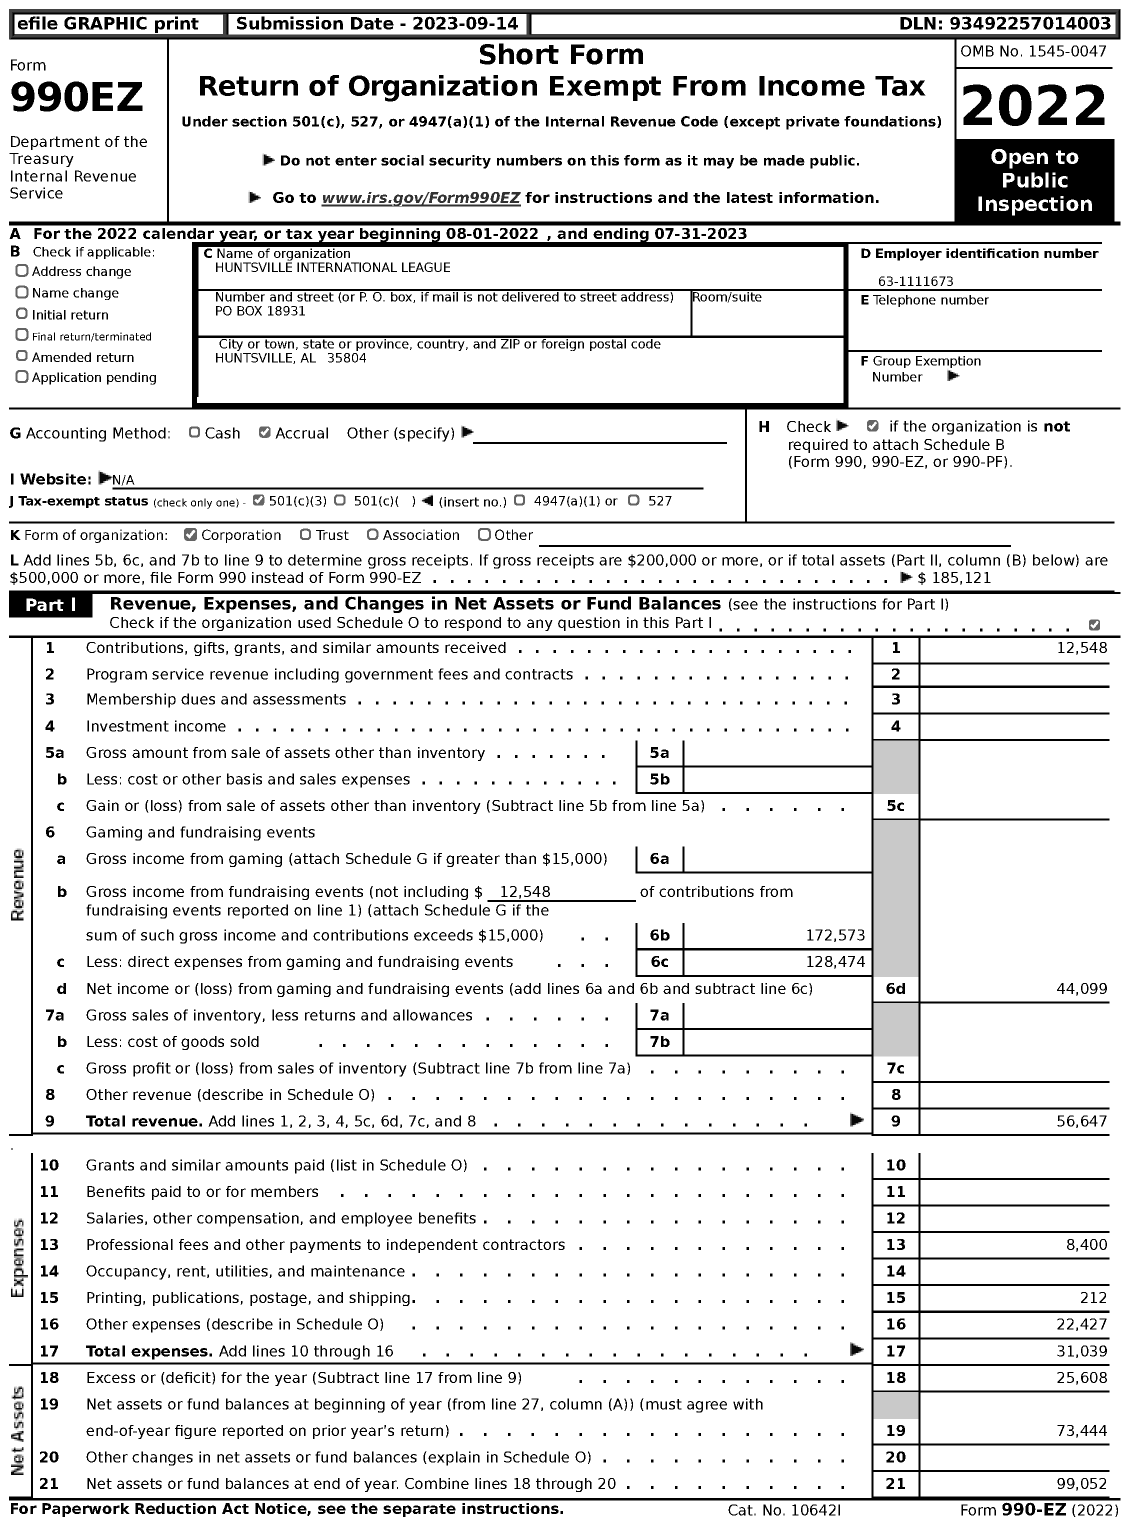 Image of first page of 2022 Form 990EZ for Little League Baseball - 3010805 Huntsville International LL